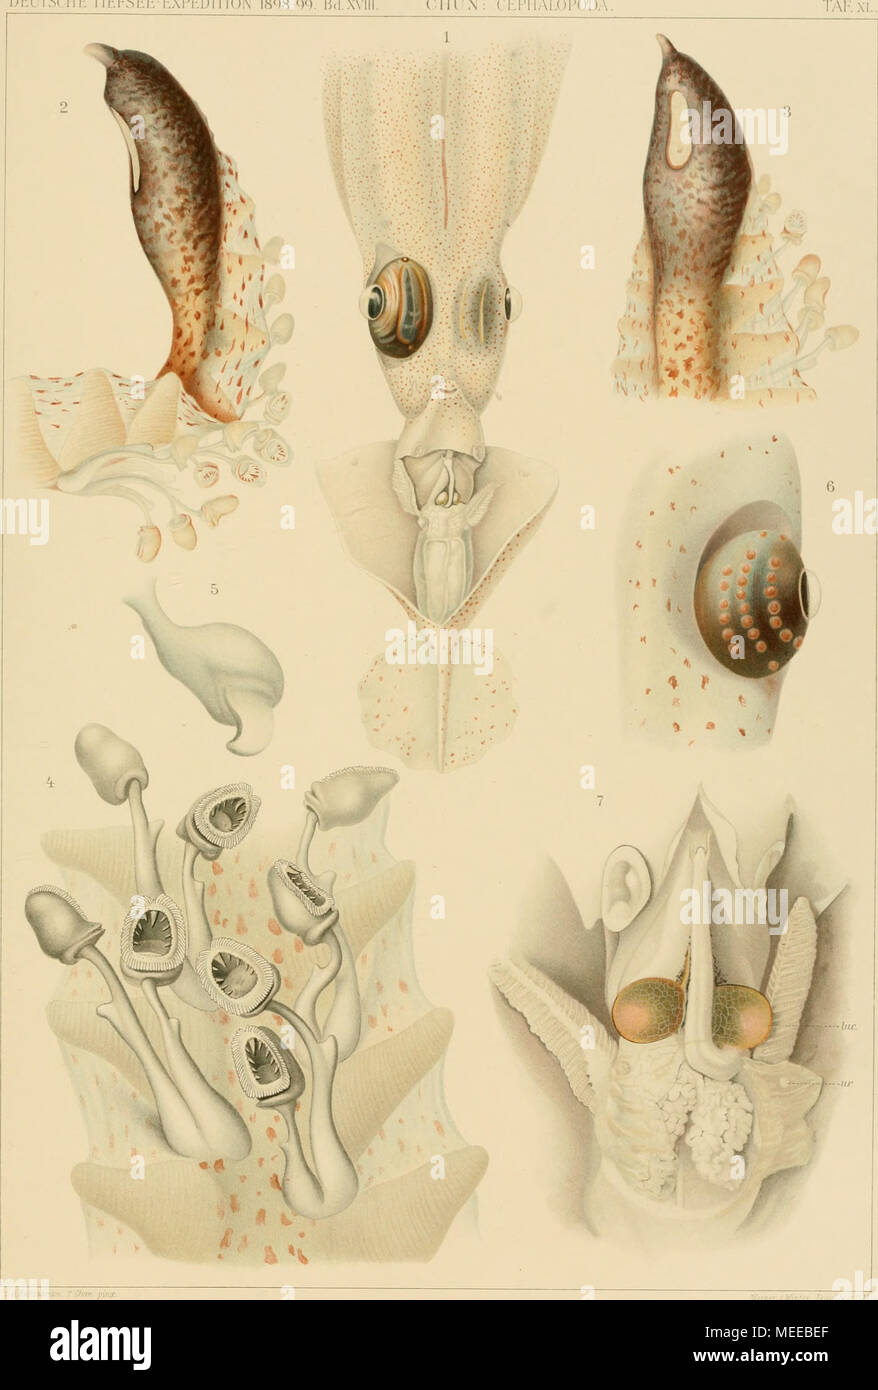 . Cephalopoden sterben. Taf. XL. Ich Chiroteuthis Veranyi Feruss. 2-5, 7 Chiroteuthis Imperator n. sp. 6 Chiroteuthis Picteti Jouh. . O.j:':. Stockfoto